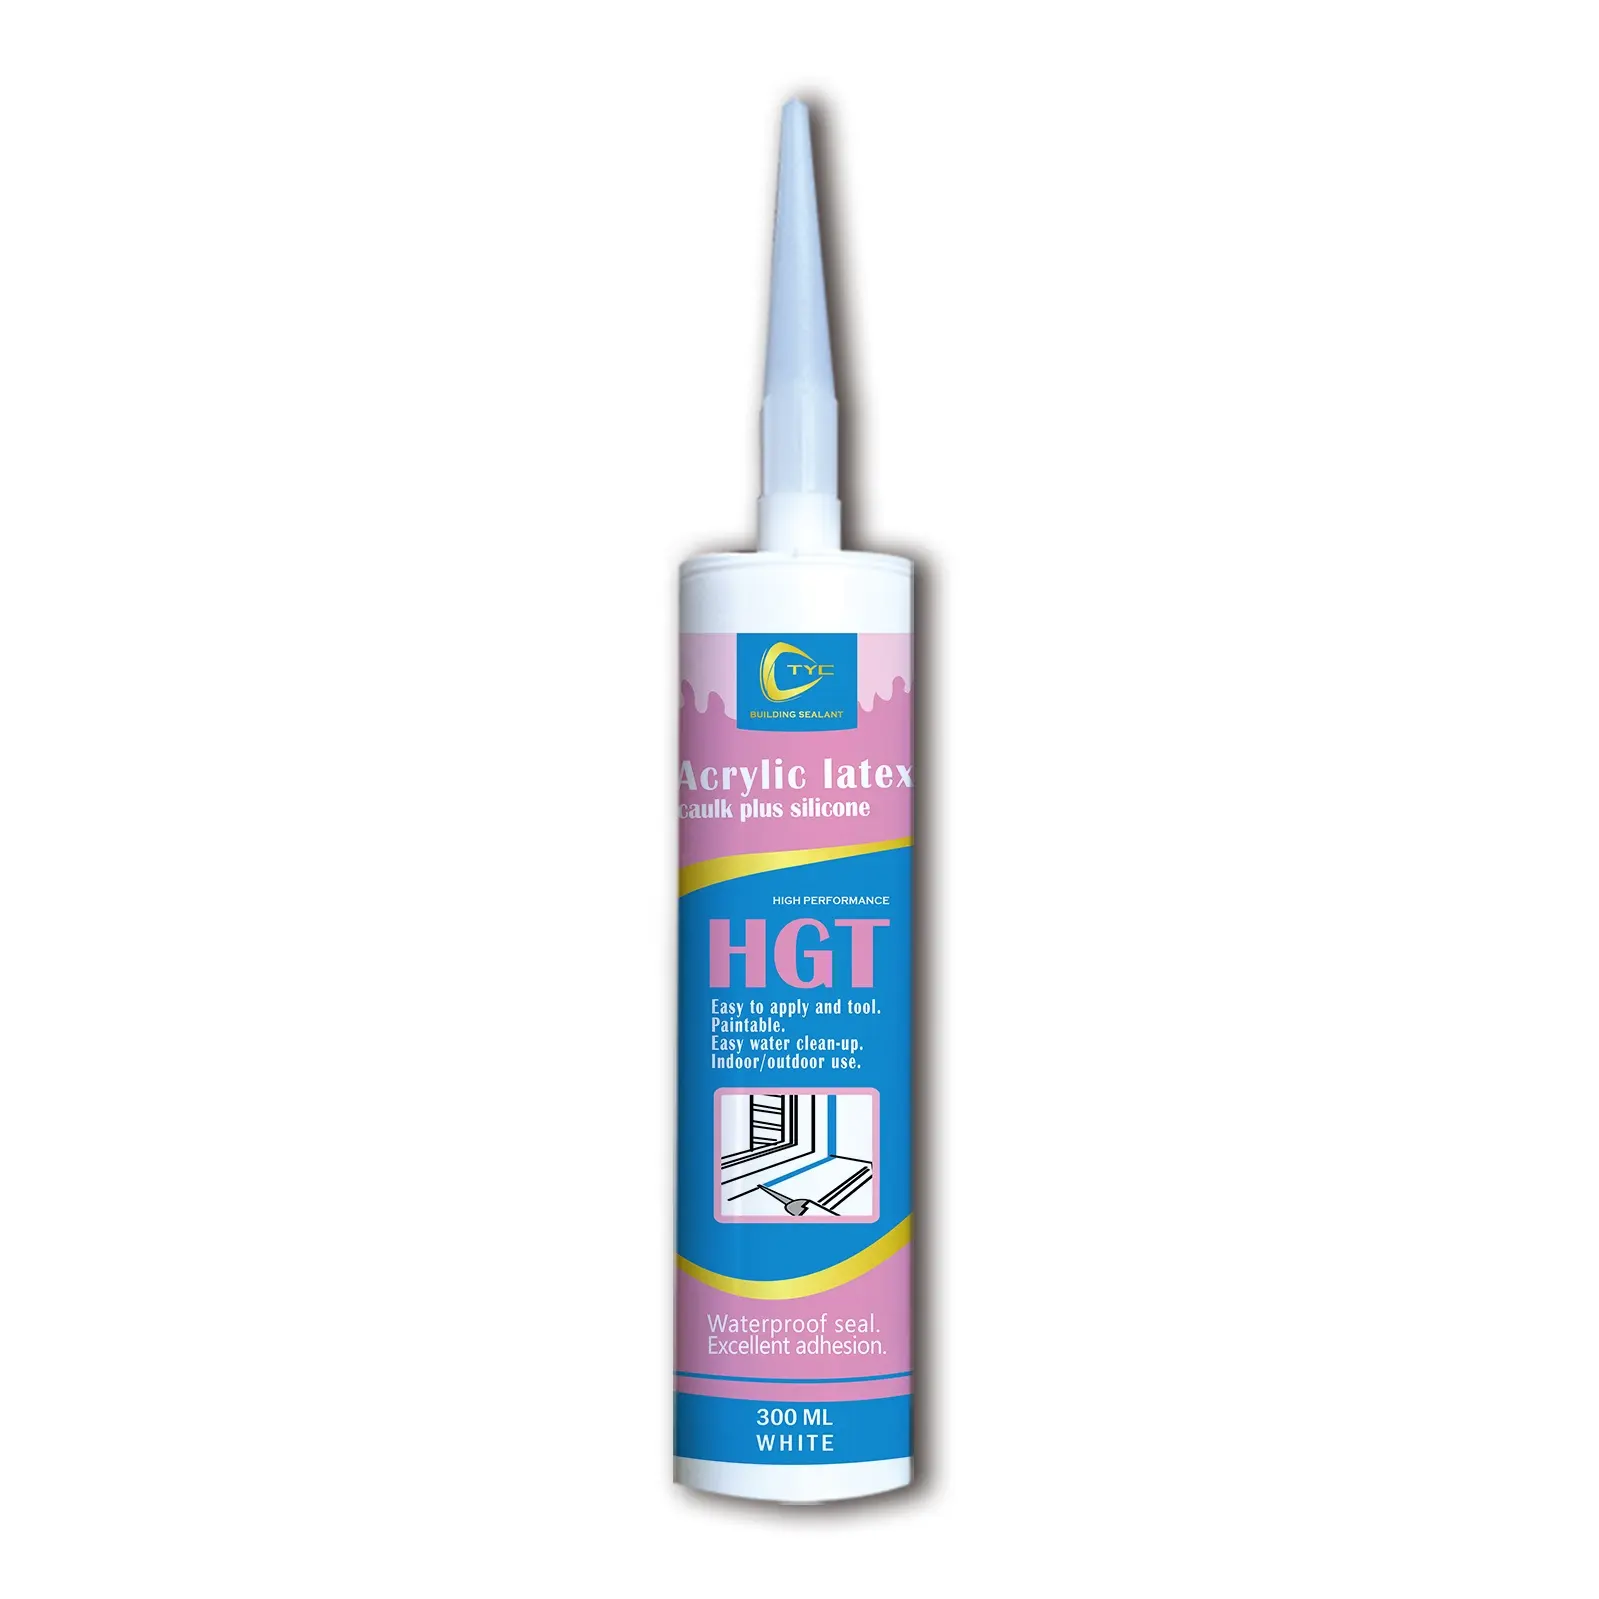 Cheap Manufacture Price and Cost Effective Sealant Acrylic Latex Plus Silicone White